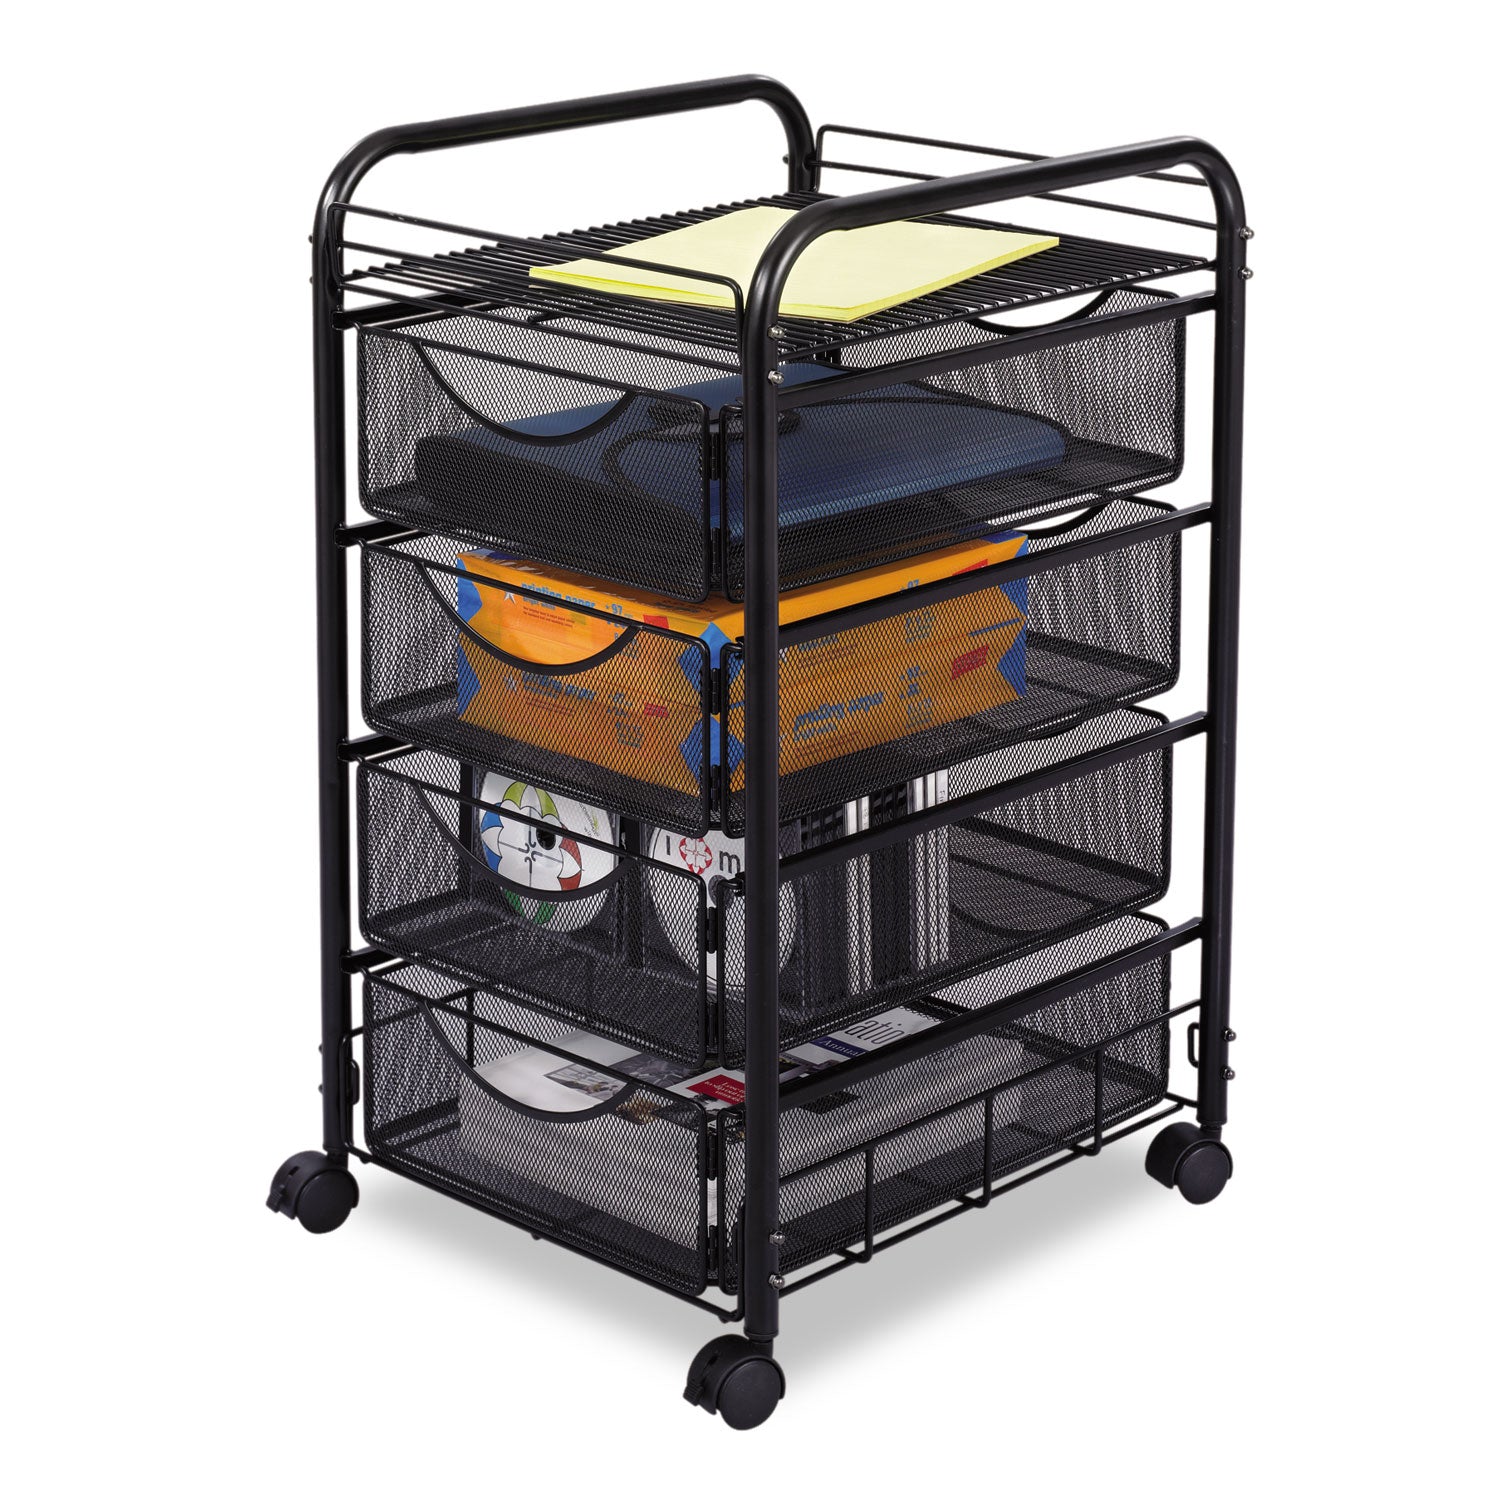 Safco Onyx Double Mesh Mobile File Cart - 2 Shelf - 4 Drawer - 4 Casters - 1.50" Caster Size - x 15.8" Width x 17" Depth x 27" Height - Black Steel Frame - Black - 1 Each - 1